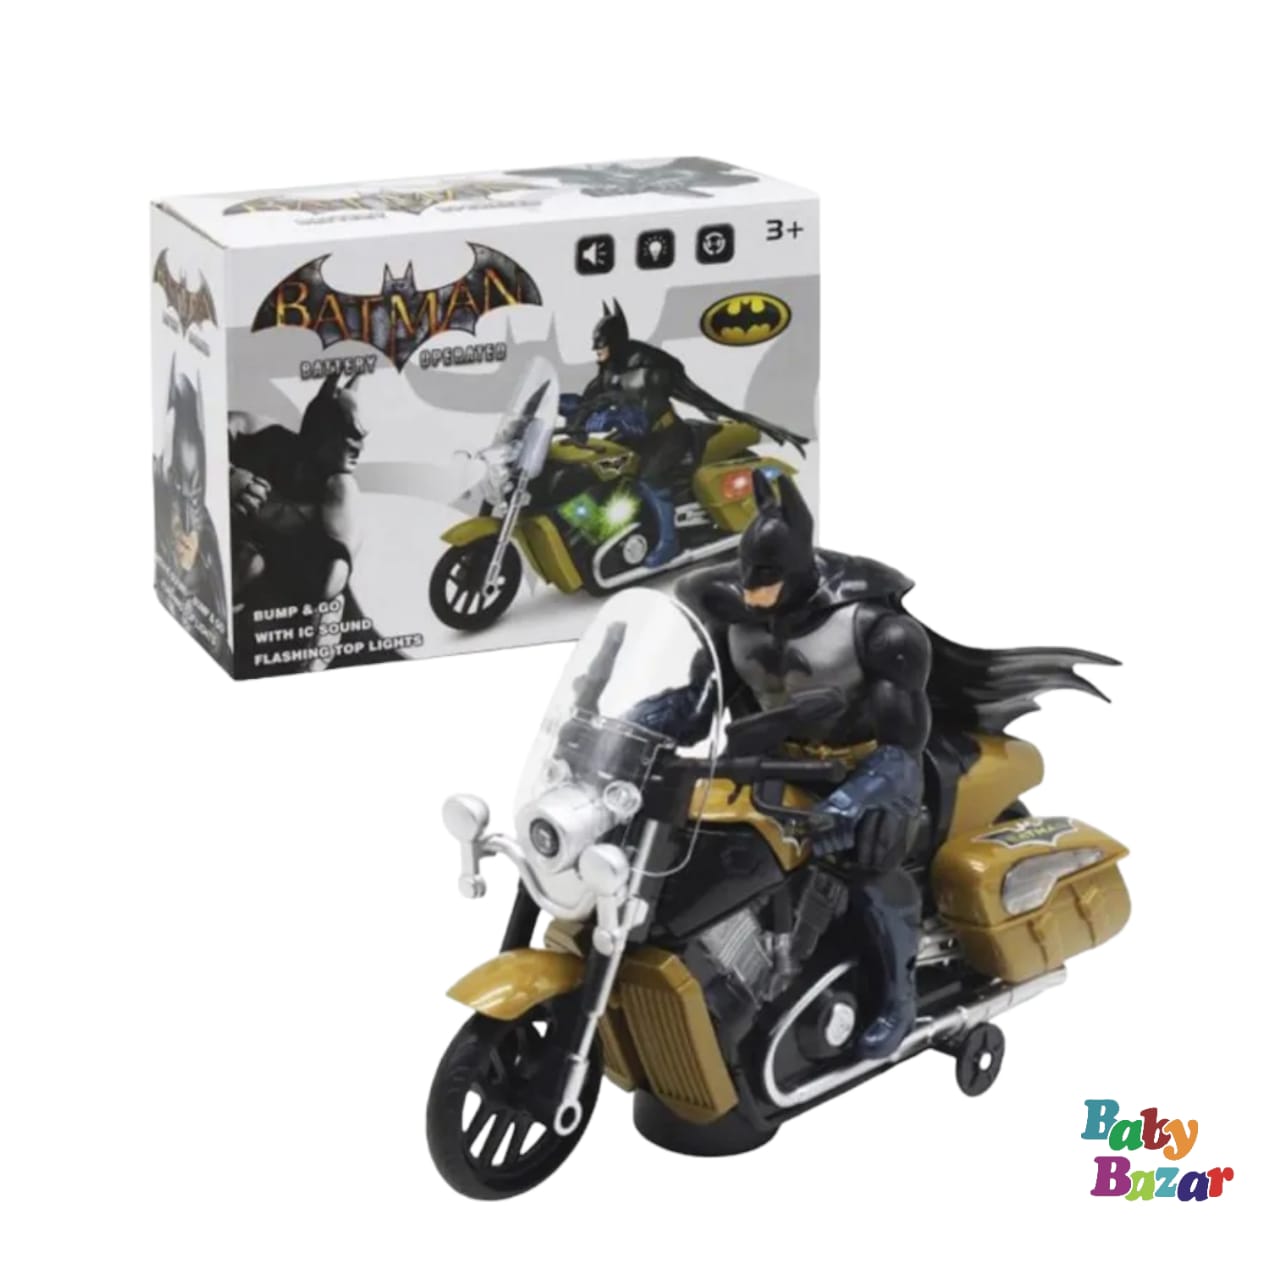 BATMAN - Battery Operated Motorcycle with IC Sound and Flashing Lights